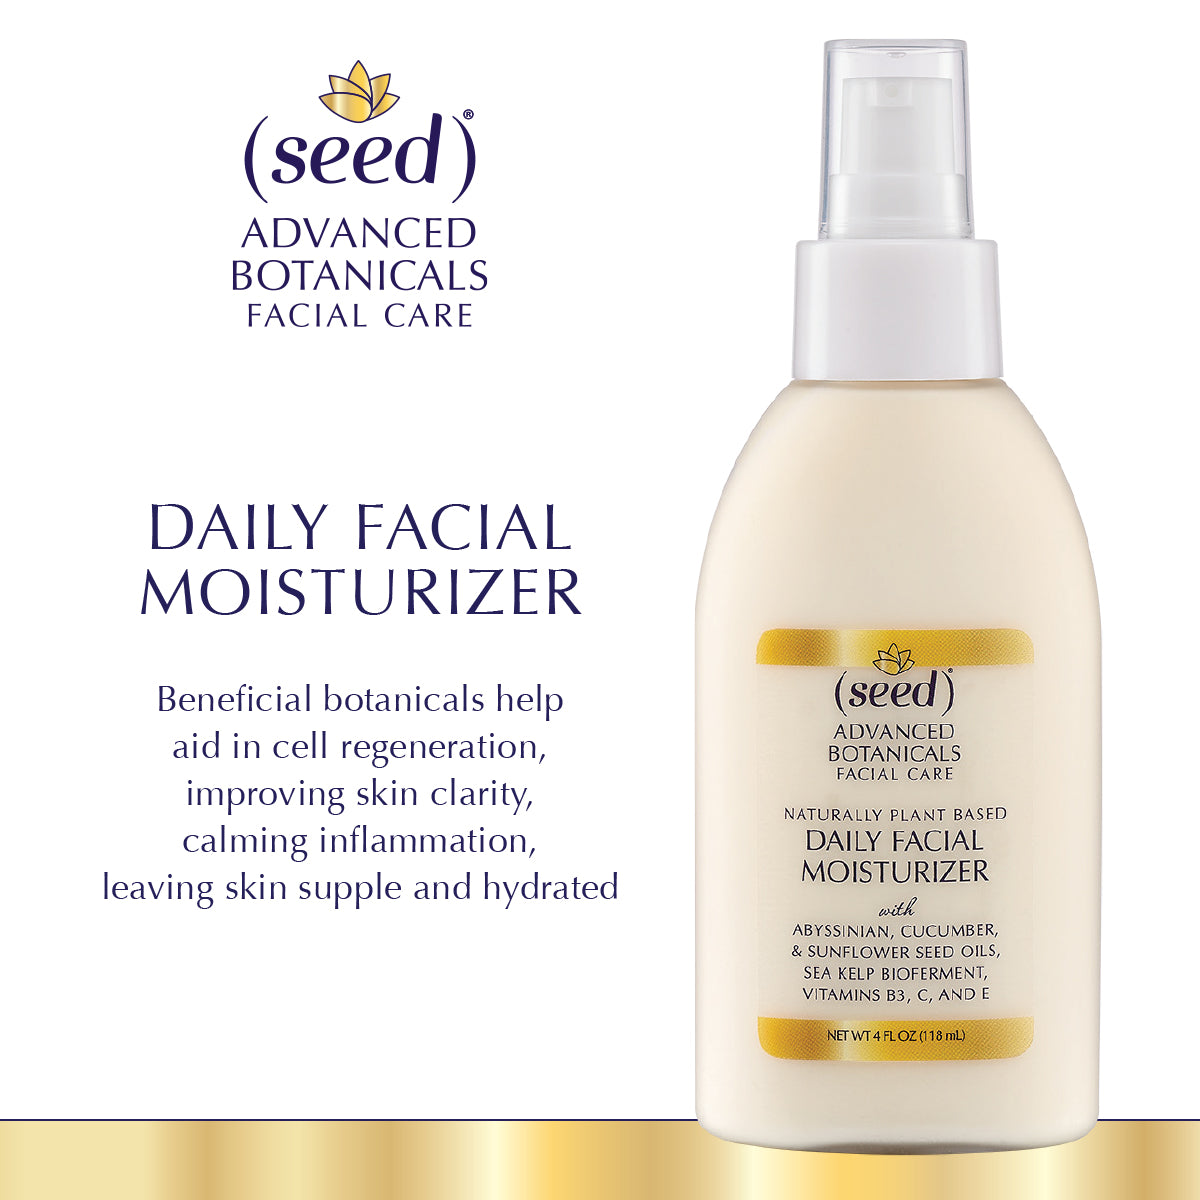 Seed Advanced Botanicals Daily Facial Moisturizer skin care benefits